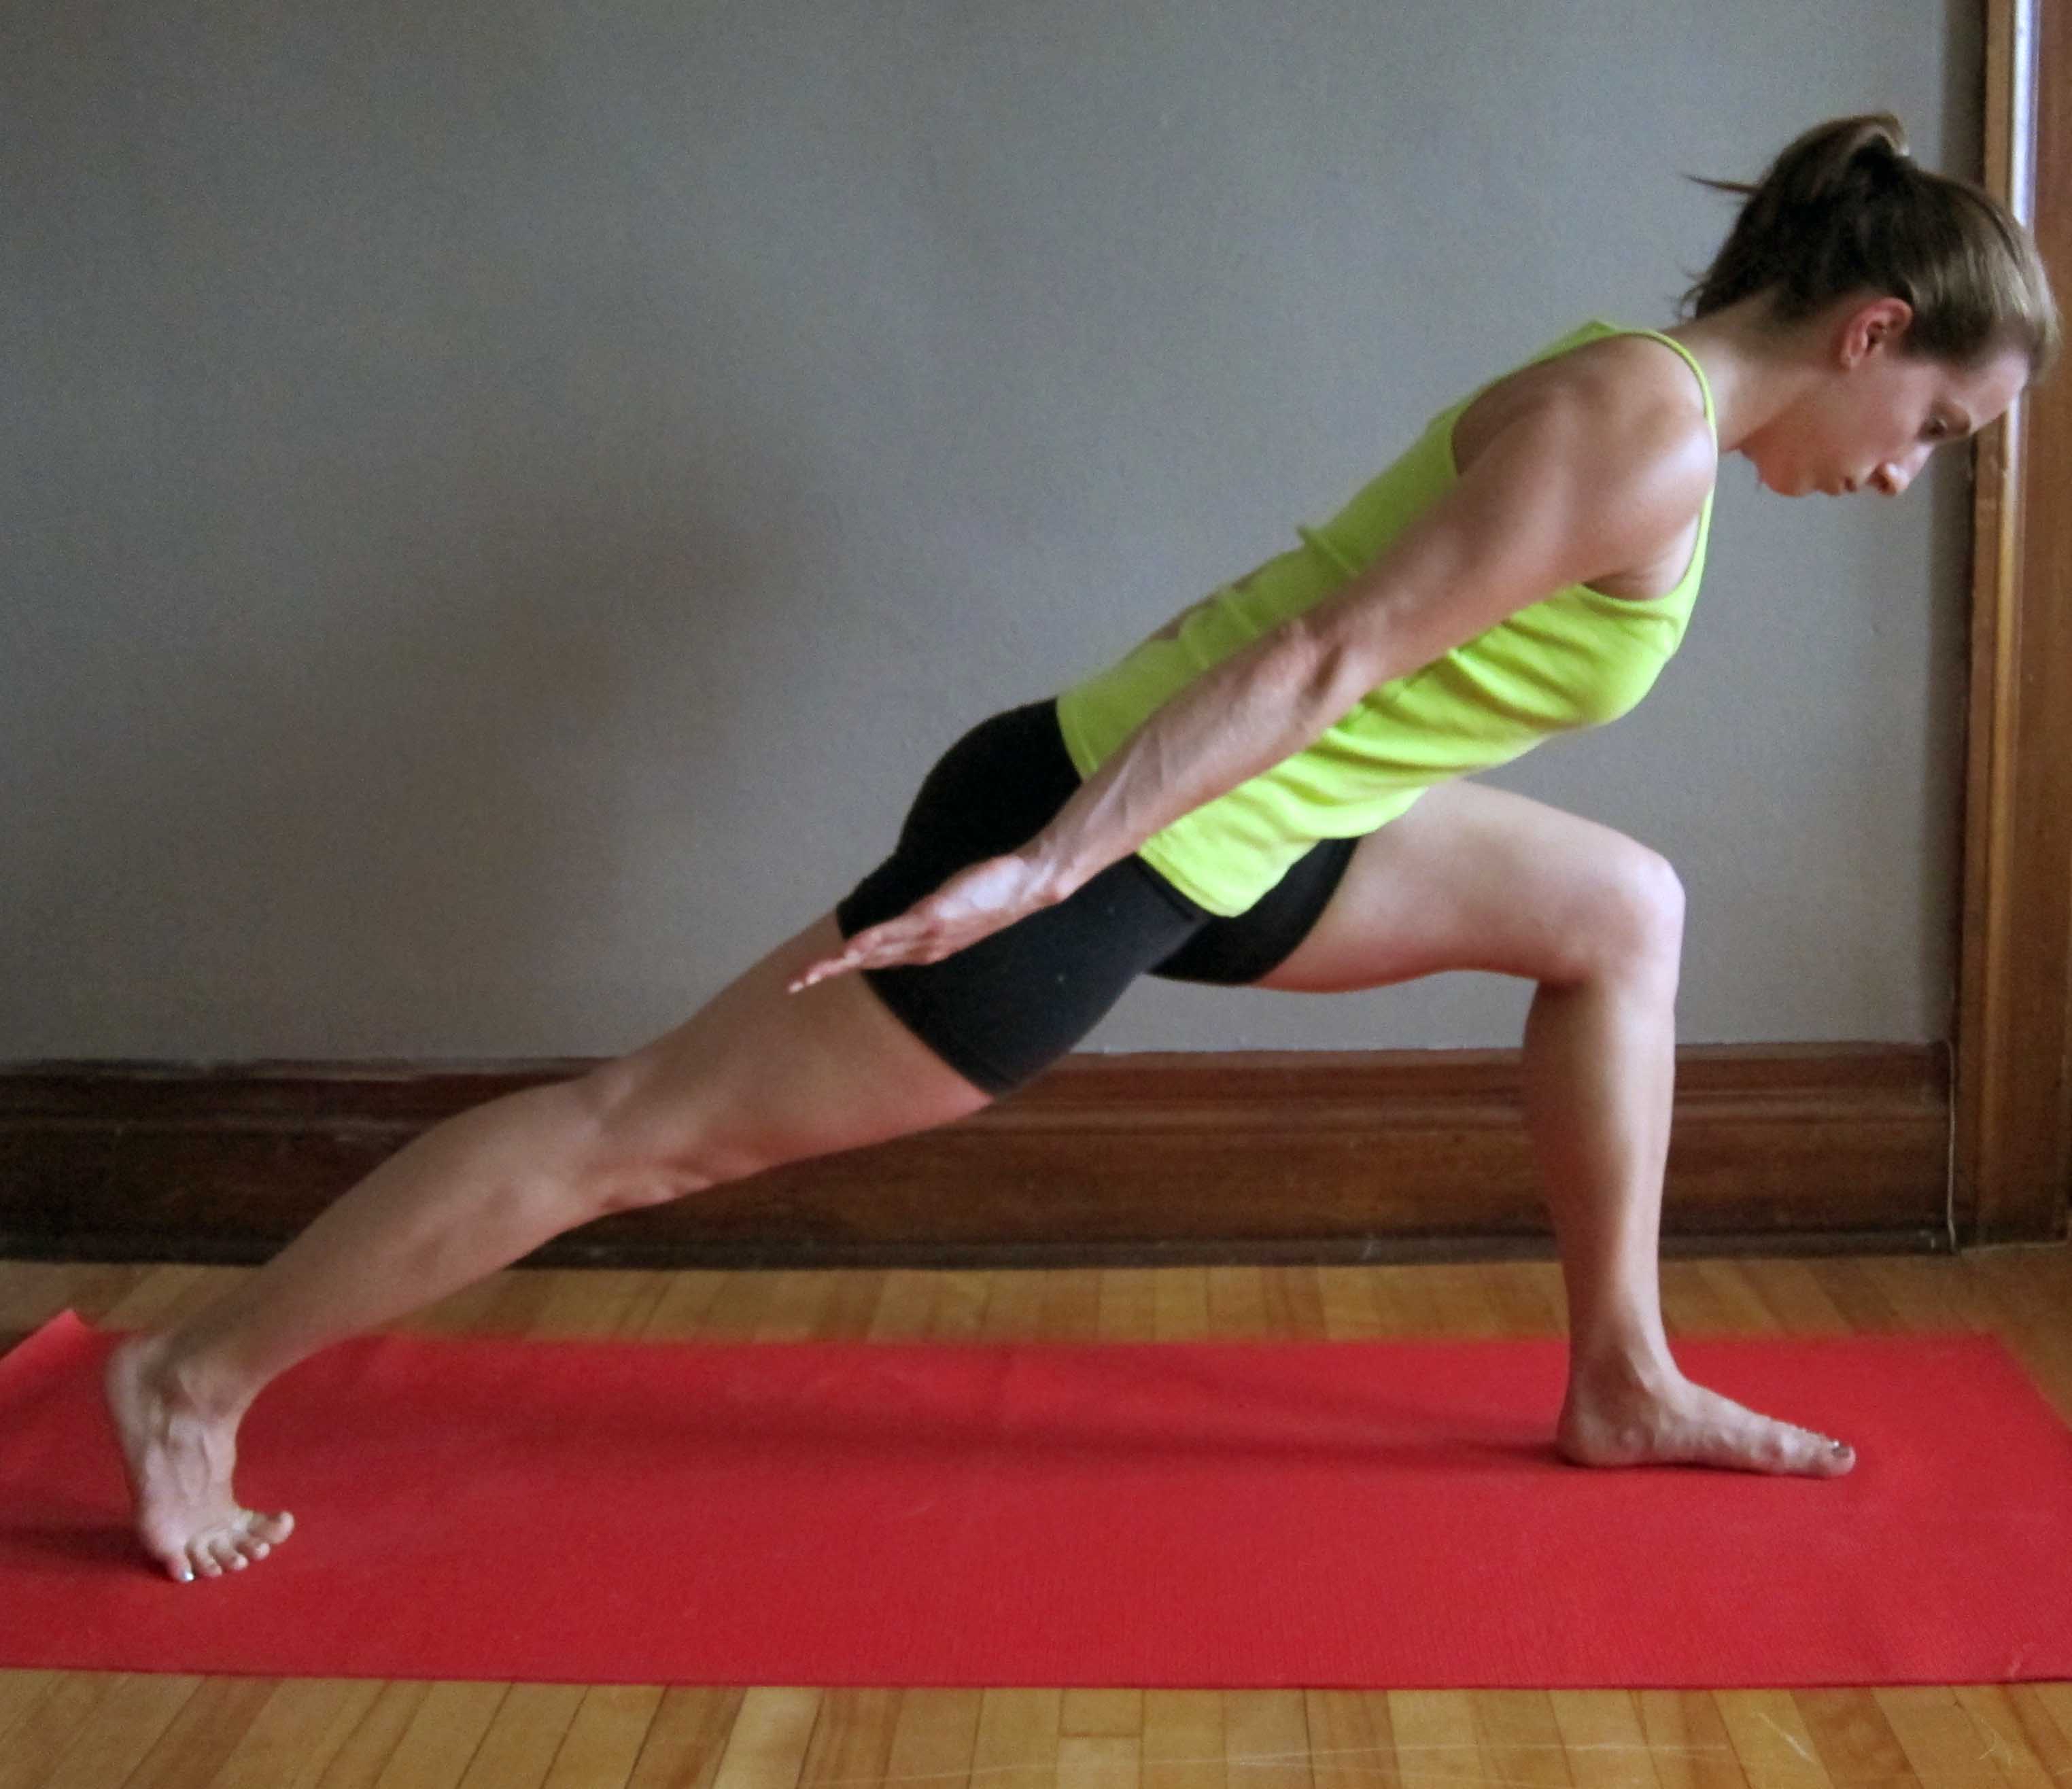 You'll Love This Weighted Yoga Flow Even If You're Not a 'Yoga Person' |  Runner's World